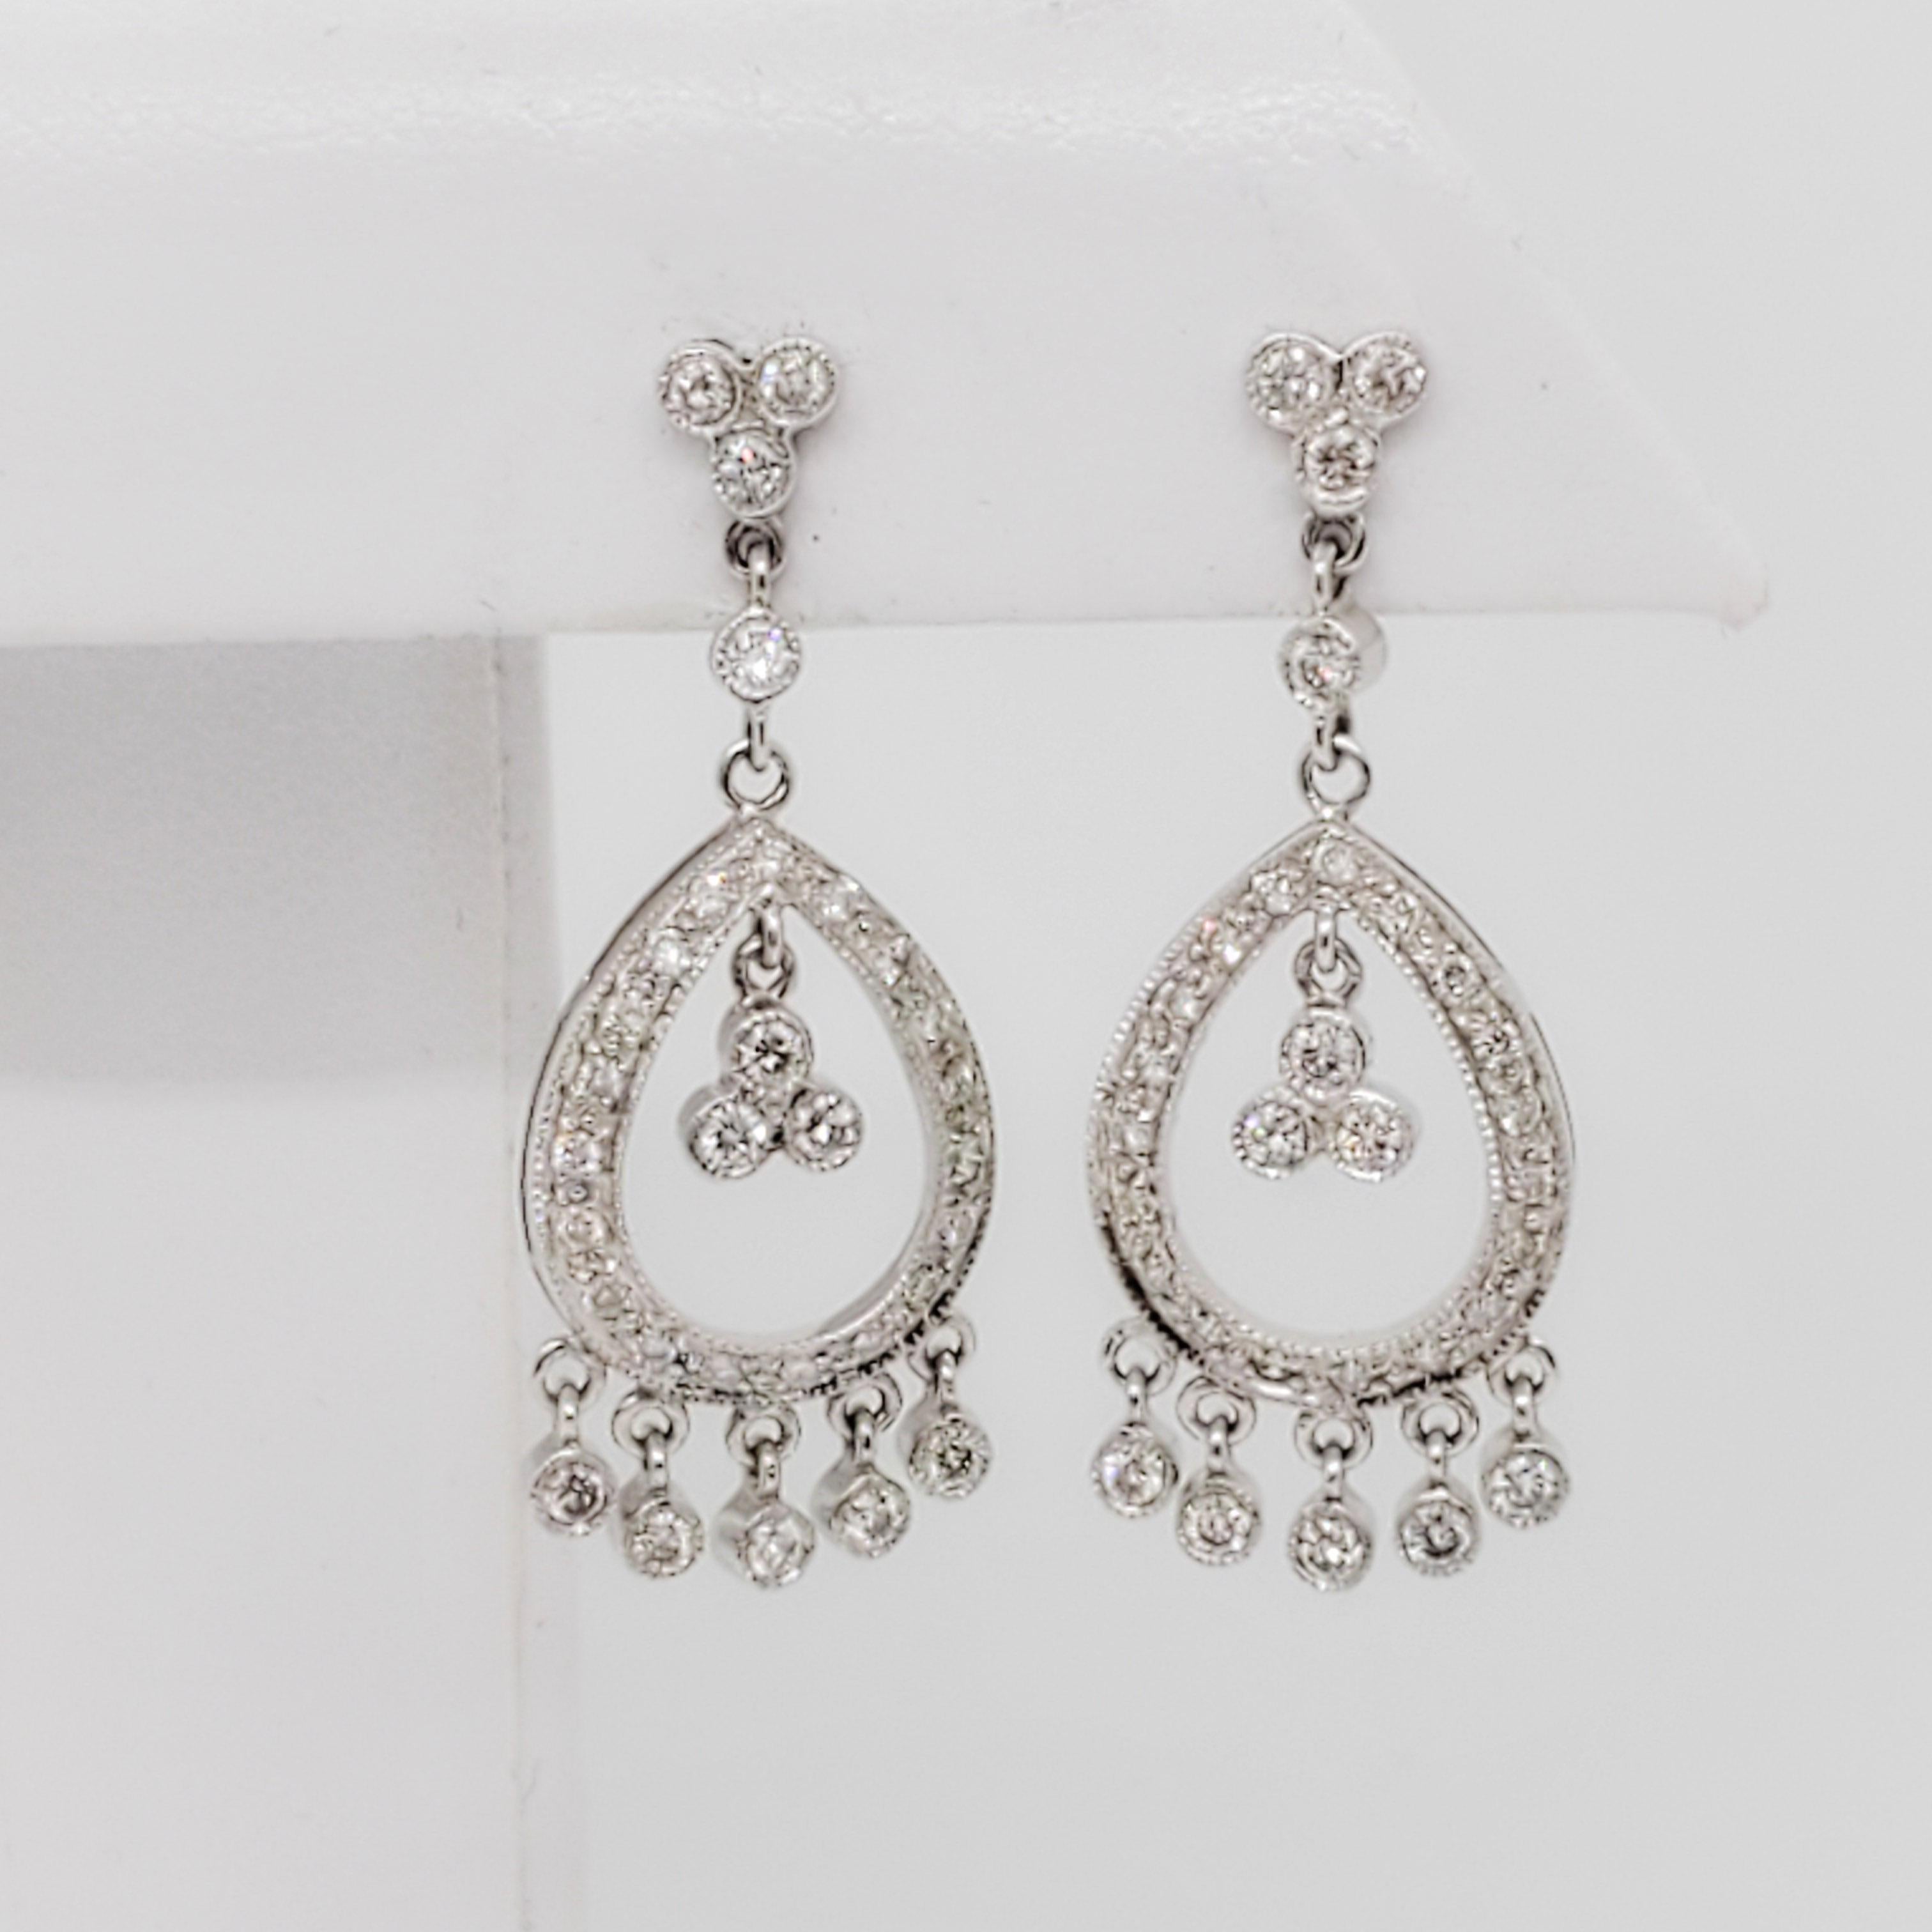 Beautiful earrings with 1.00 ct. of good quality, white, and bright diamond rounds.  Handmade in 18k white gold.